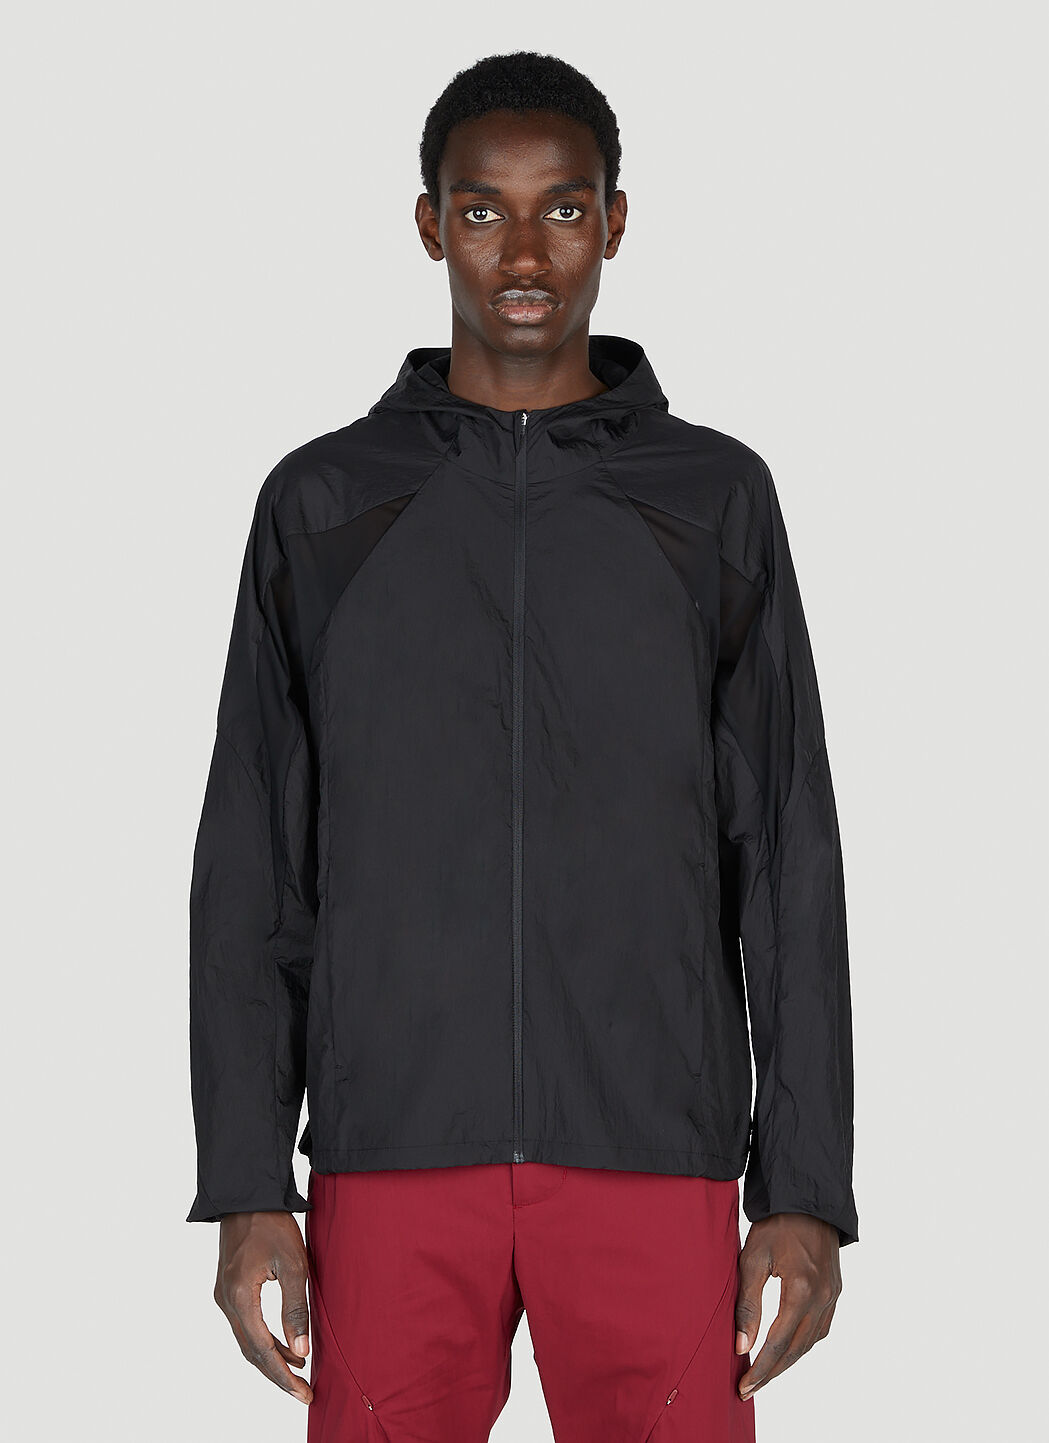 POST ARCHIVE FACTION (PAF) 5.0+ Technical Jacket in Black | LN-CC®